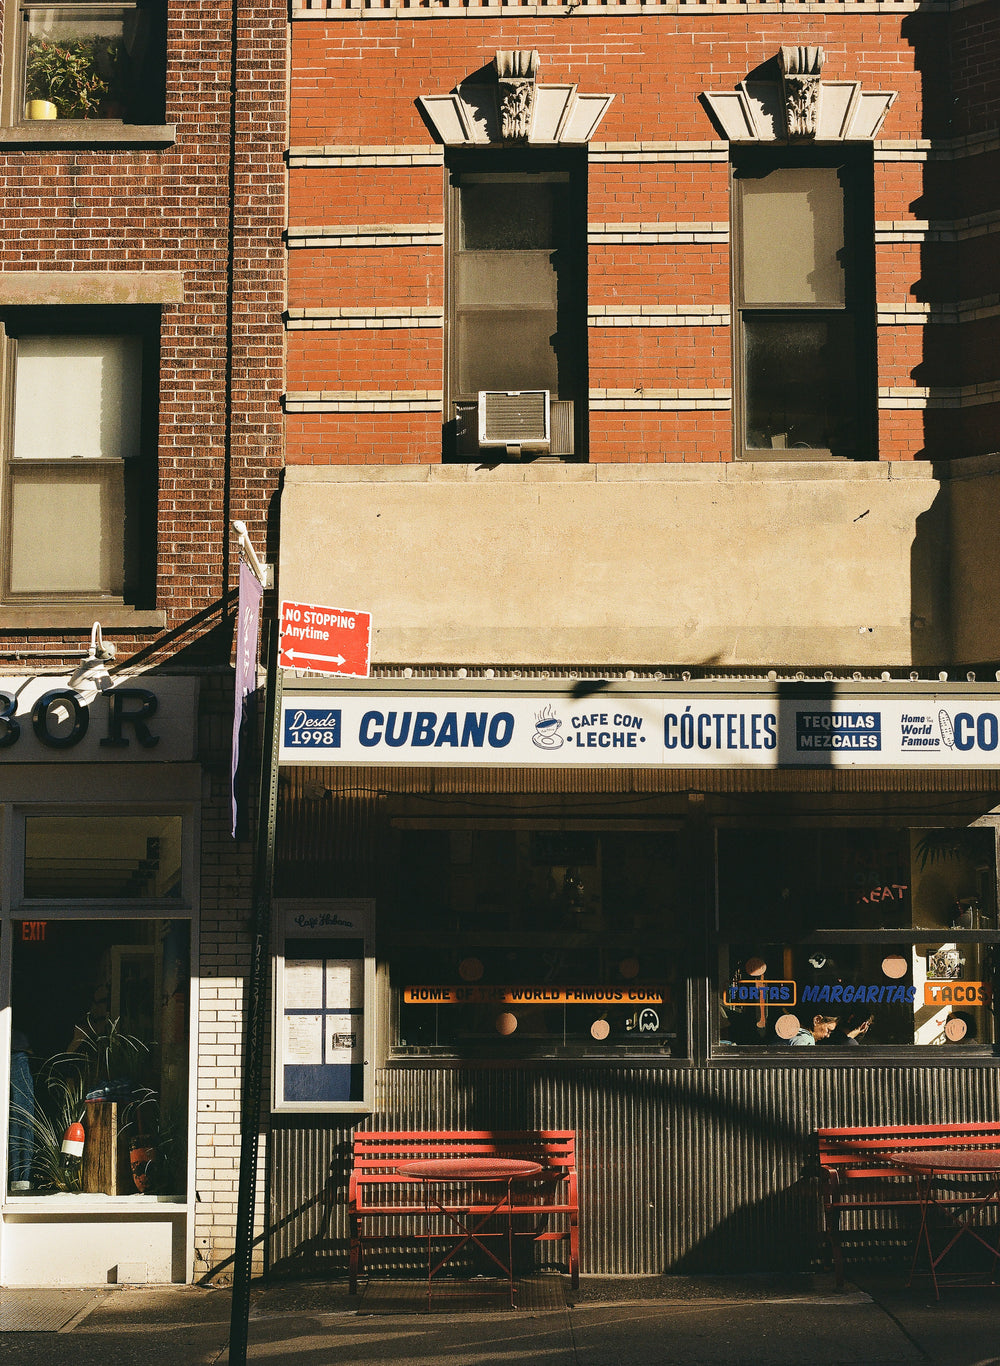 photographic image of a Cuban restaurant storefront